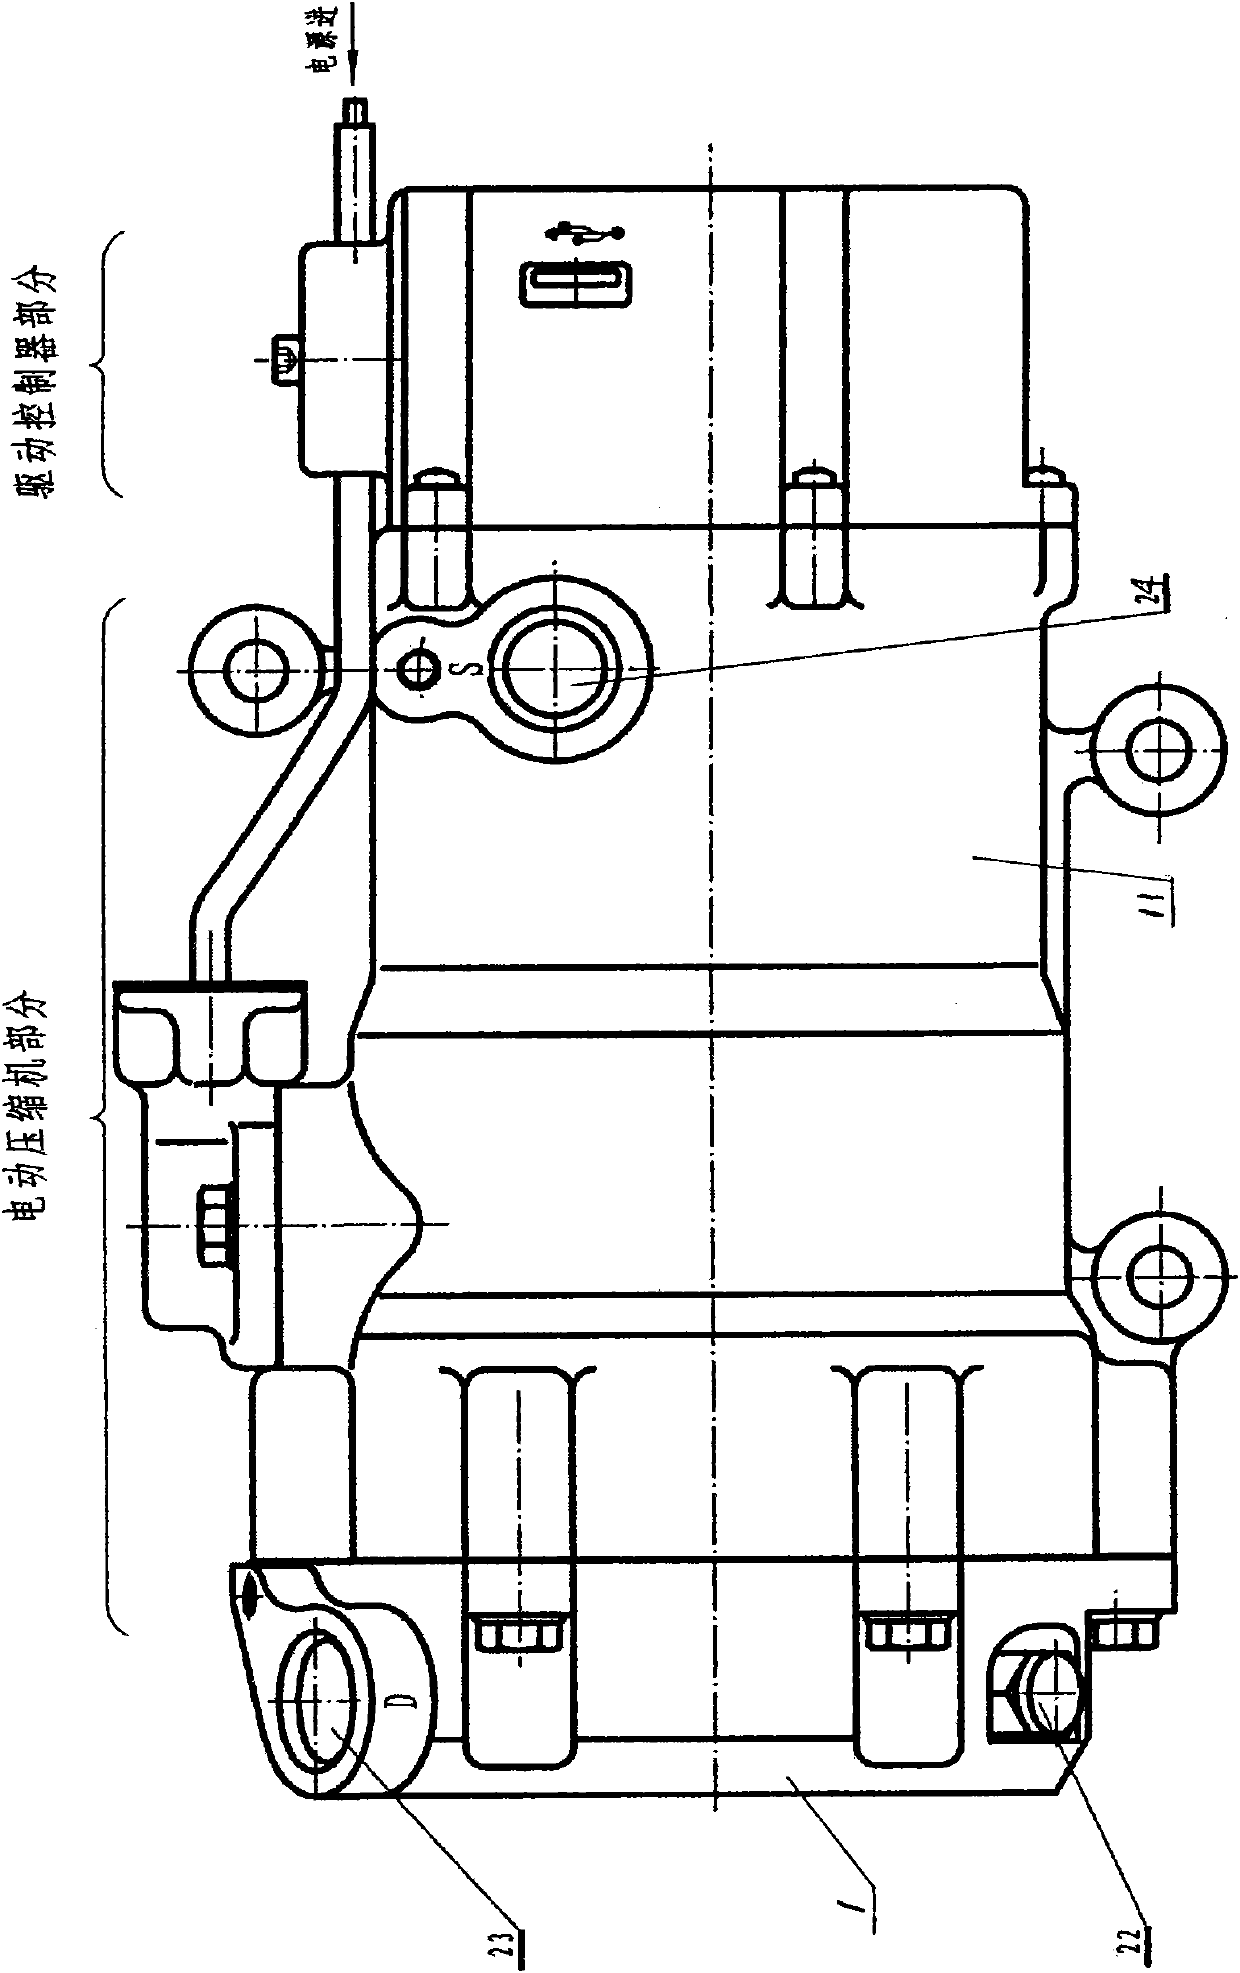 Integrated switched reluctance electric scroll compressor assembly for vehicle air conditioning